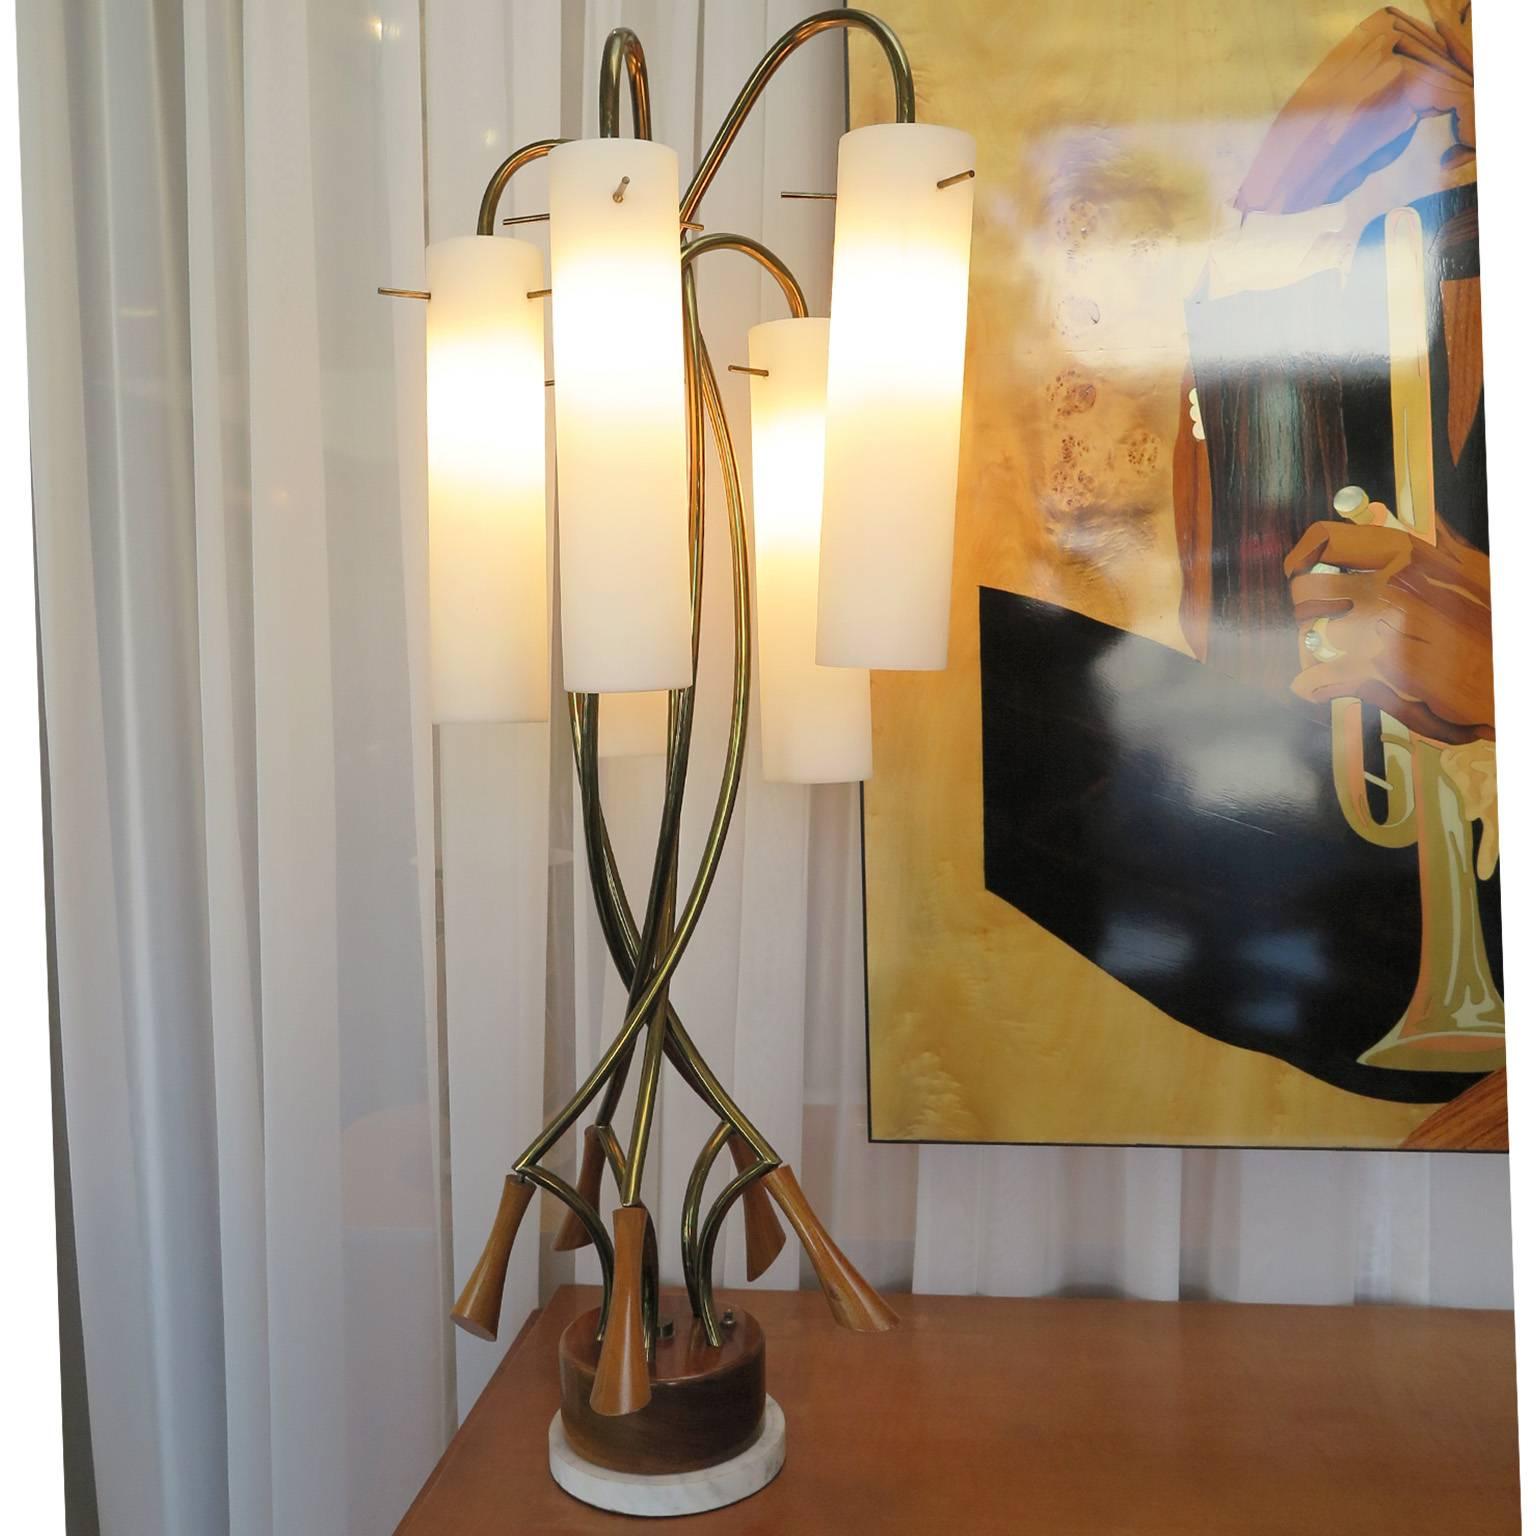 Twisted five-arm brass table lamp with frosted glass shades and set on a teak and marble base. Unique three hole attachment system of glass to frame. The lamp has three light settings and is striking in its large-scale and whimsical design.